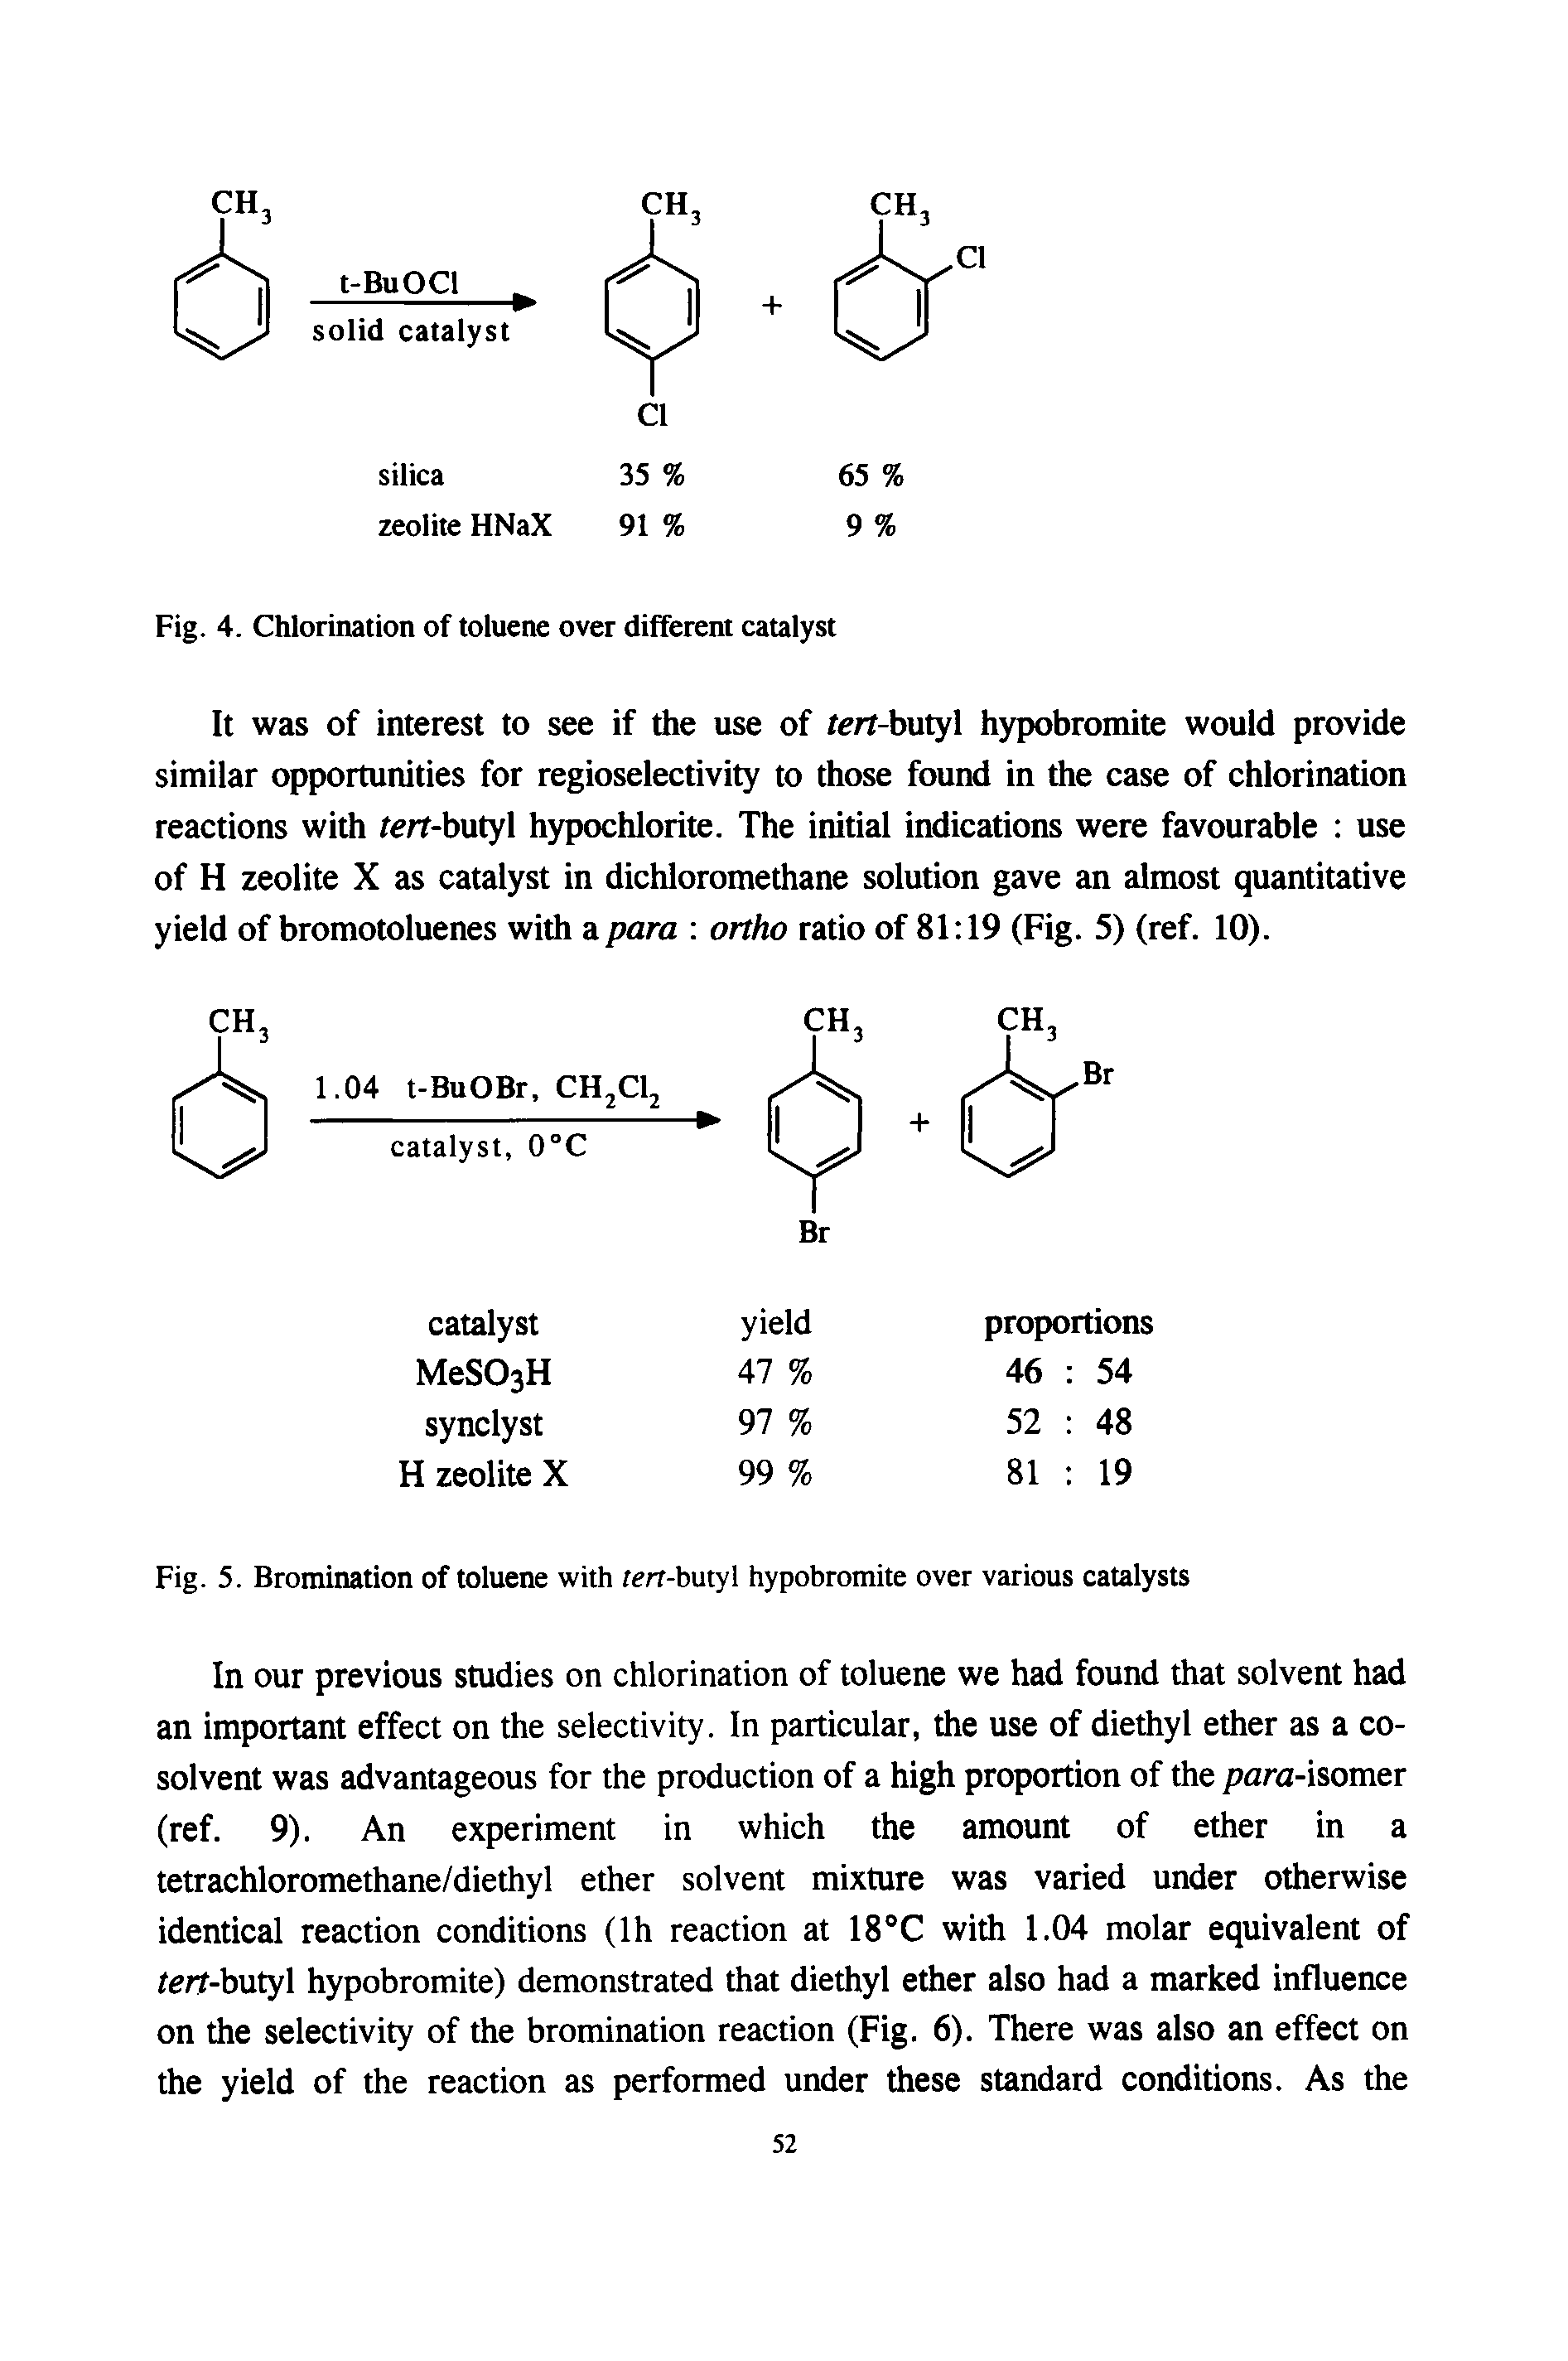 Fig. 5. Bromination of toluene with rerf-butyl hypobromite over various catalysts...